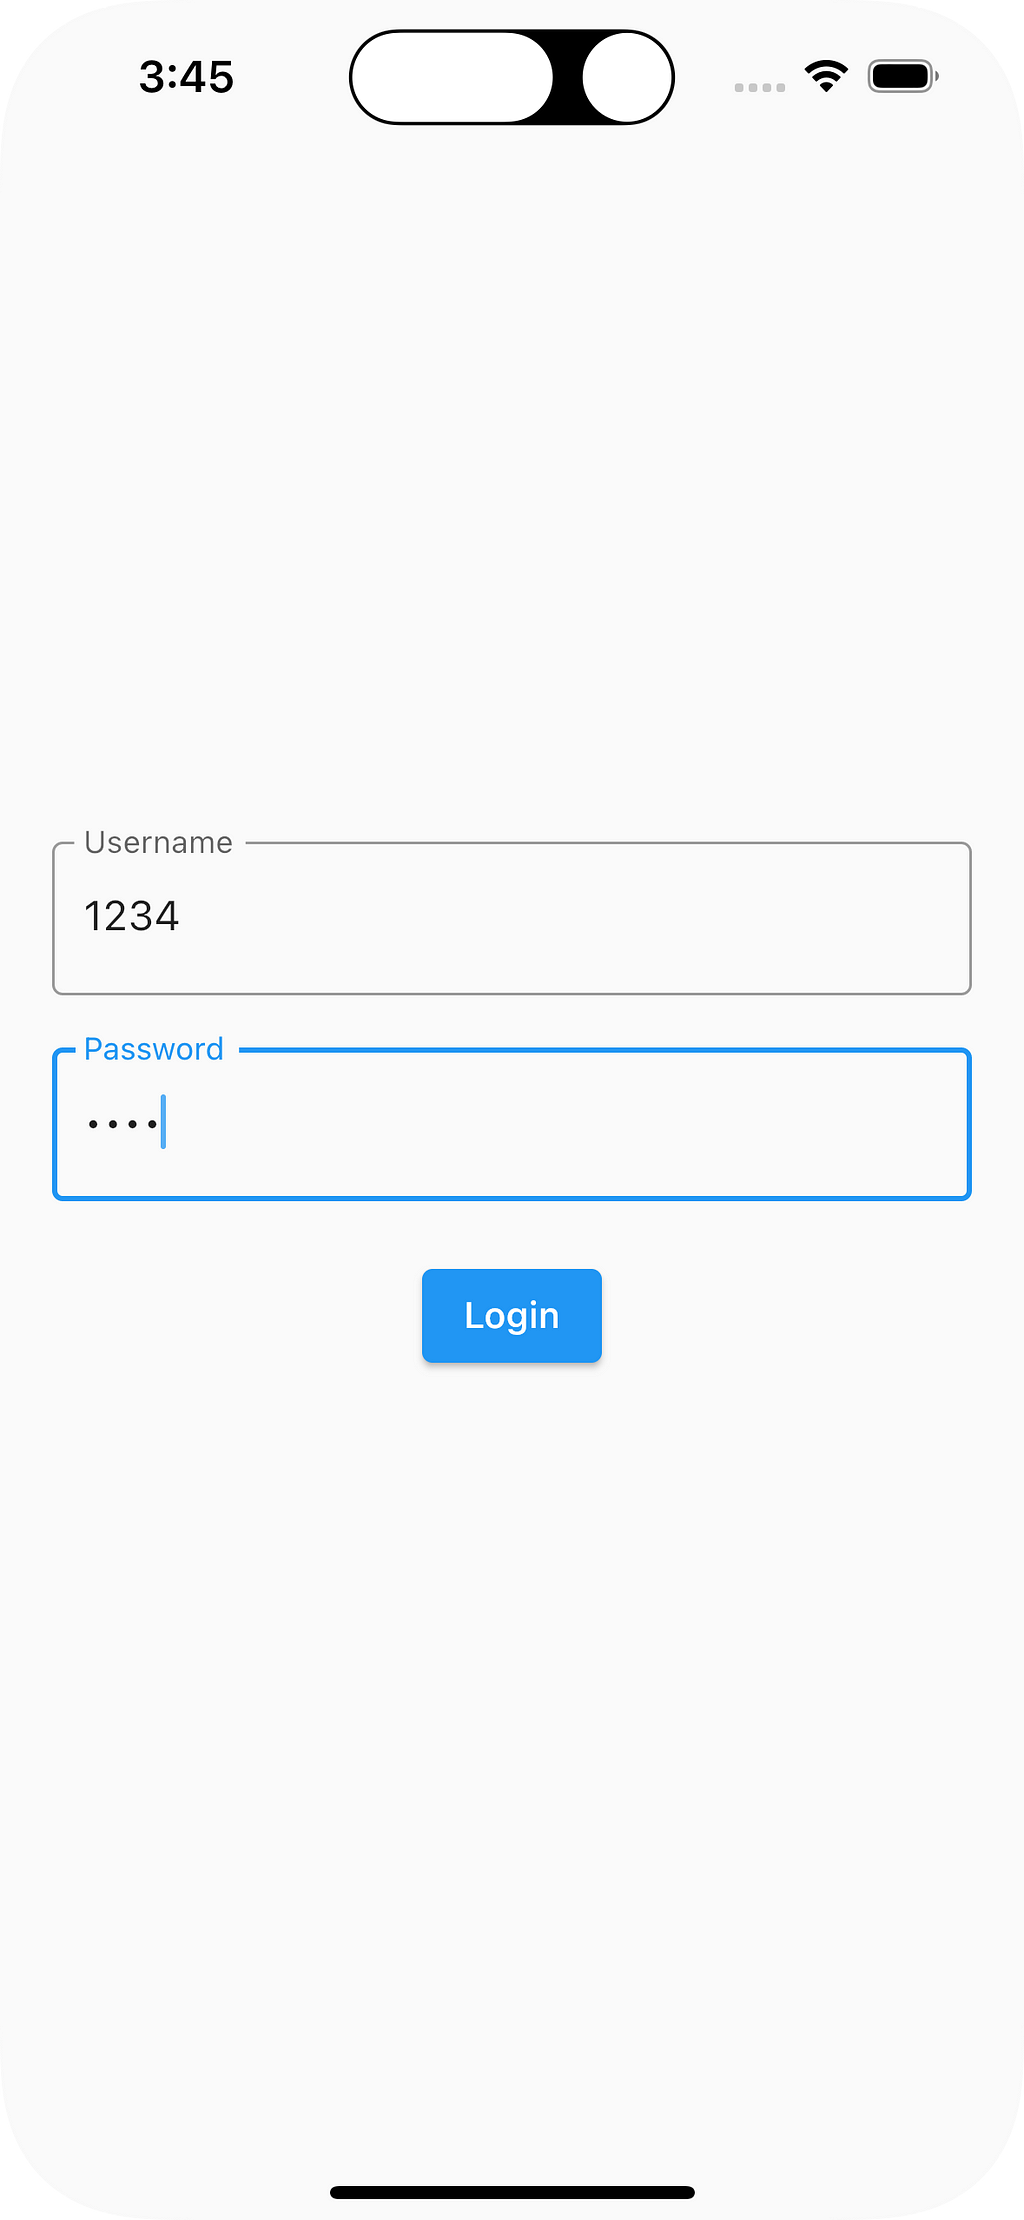 This is a photo of the app, it has two textfields, the username textfield is filled with “1234" and the password textfield is filled with “1234”. A login button is placed below the fields so that we can log into the app by pressing the button.